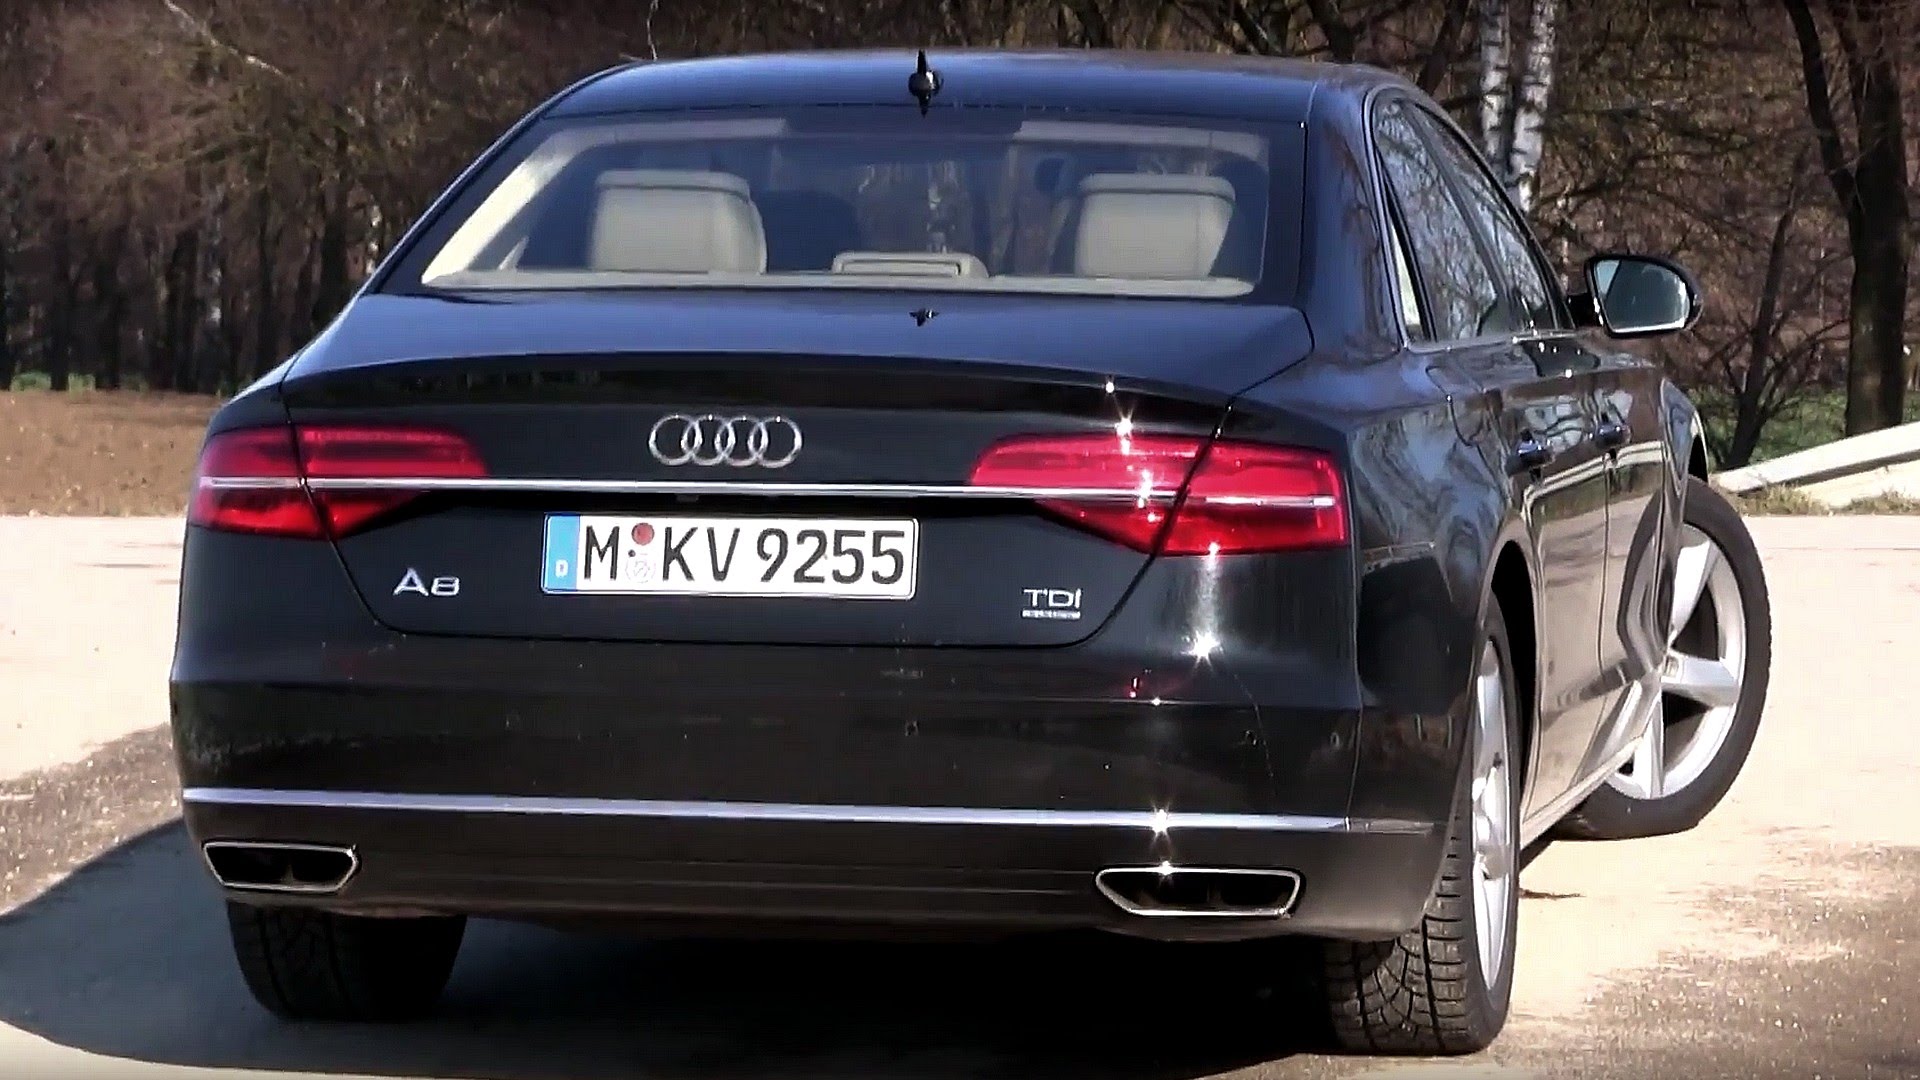 Nice wallpapers Audi A8 1920x1080px